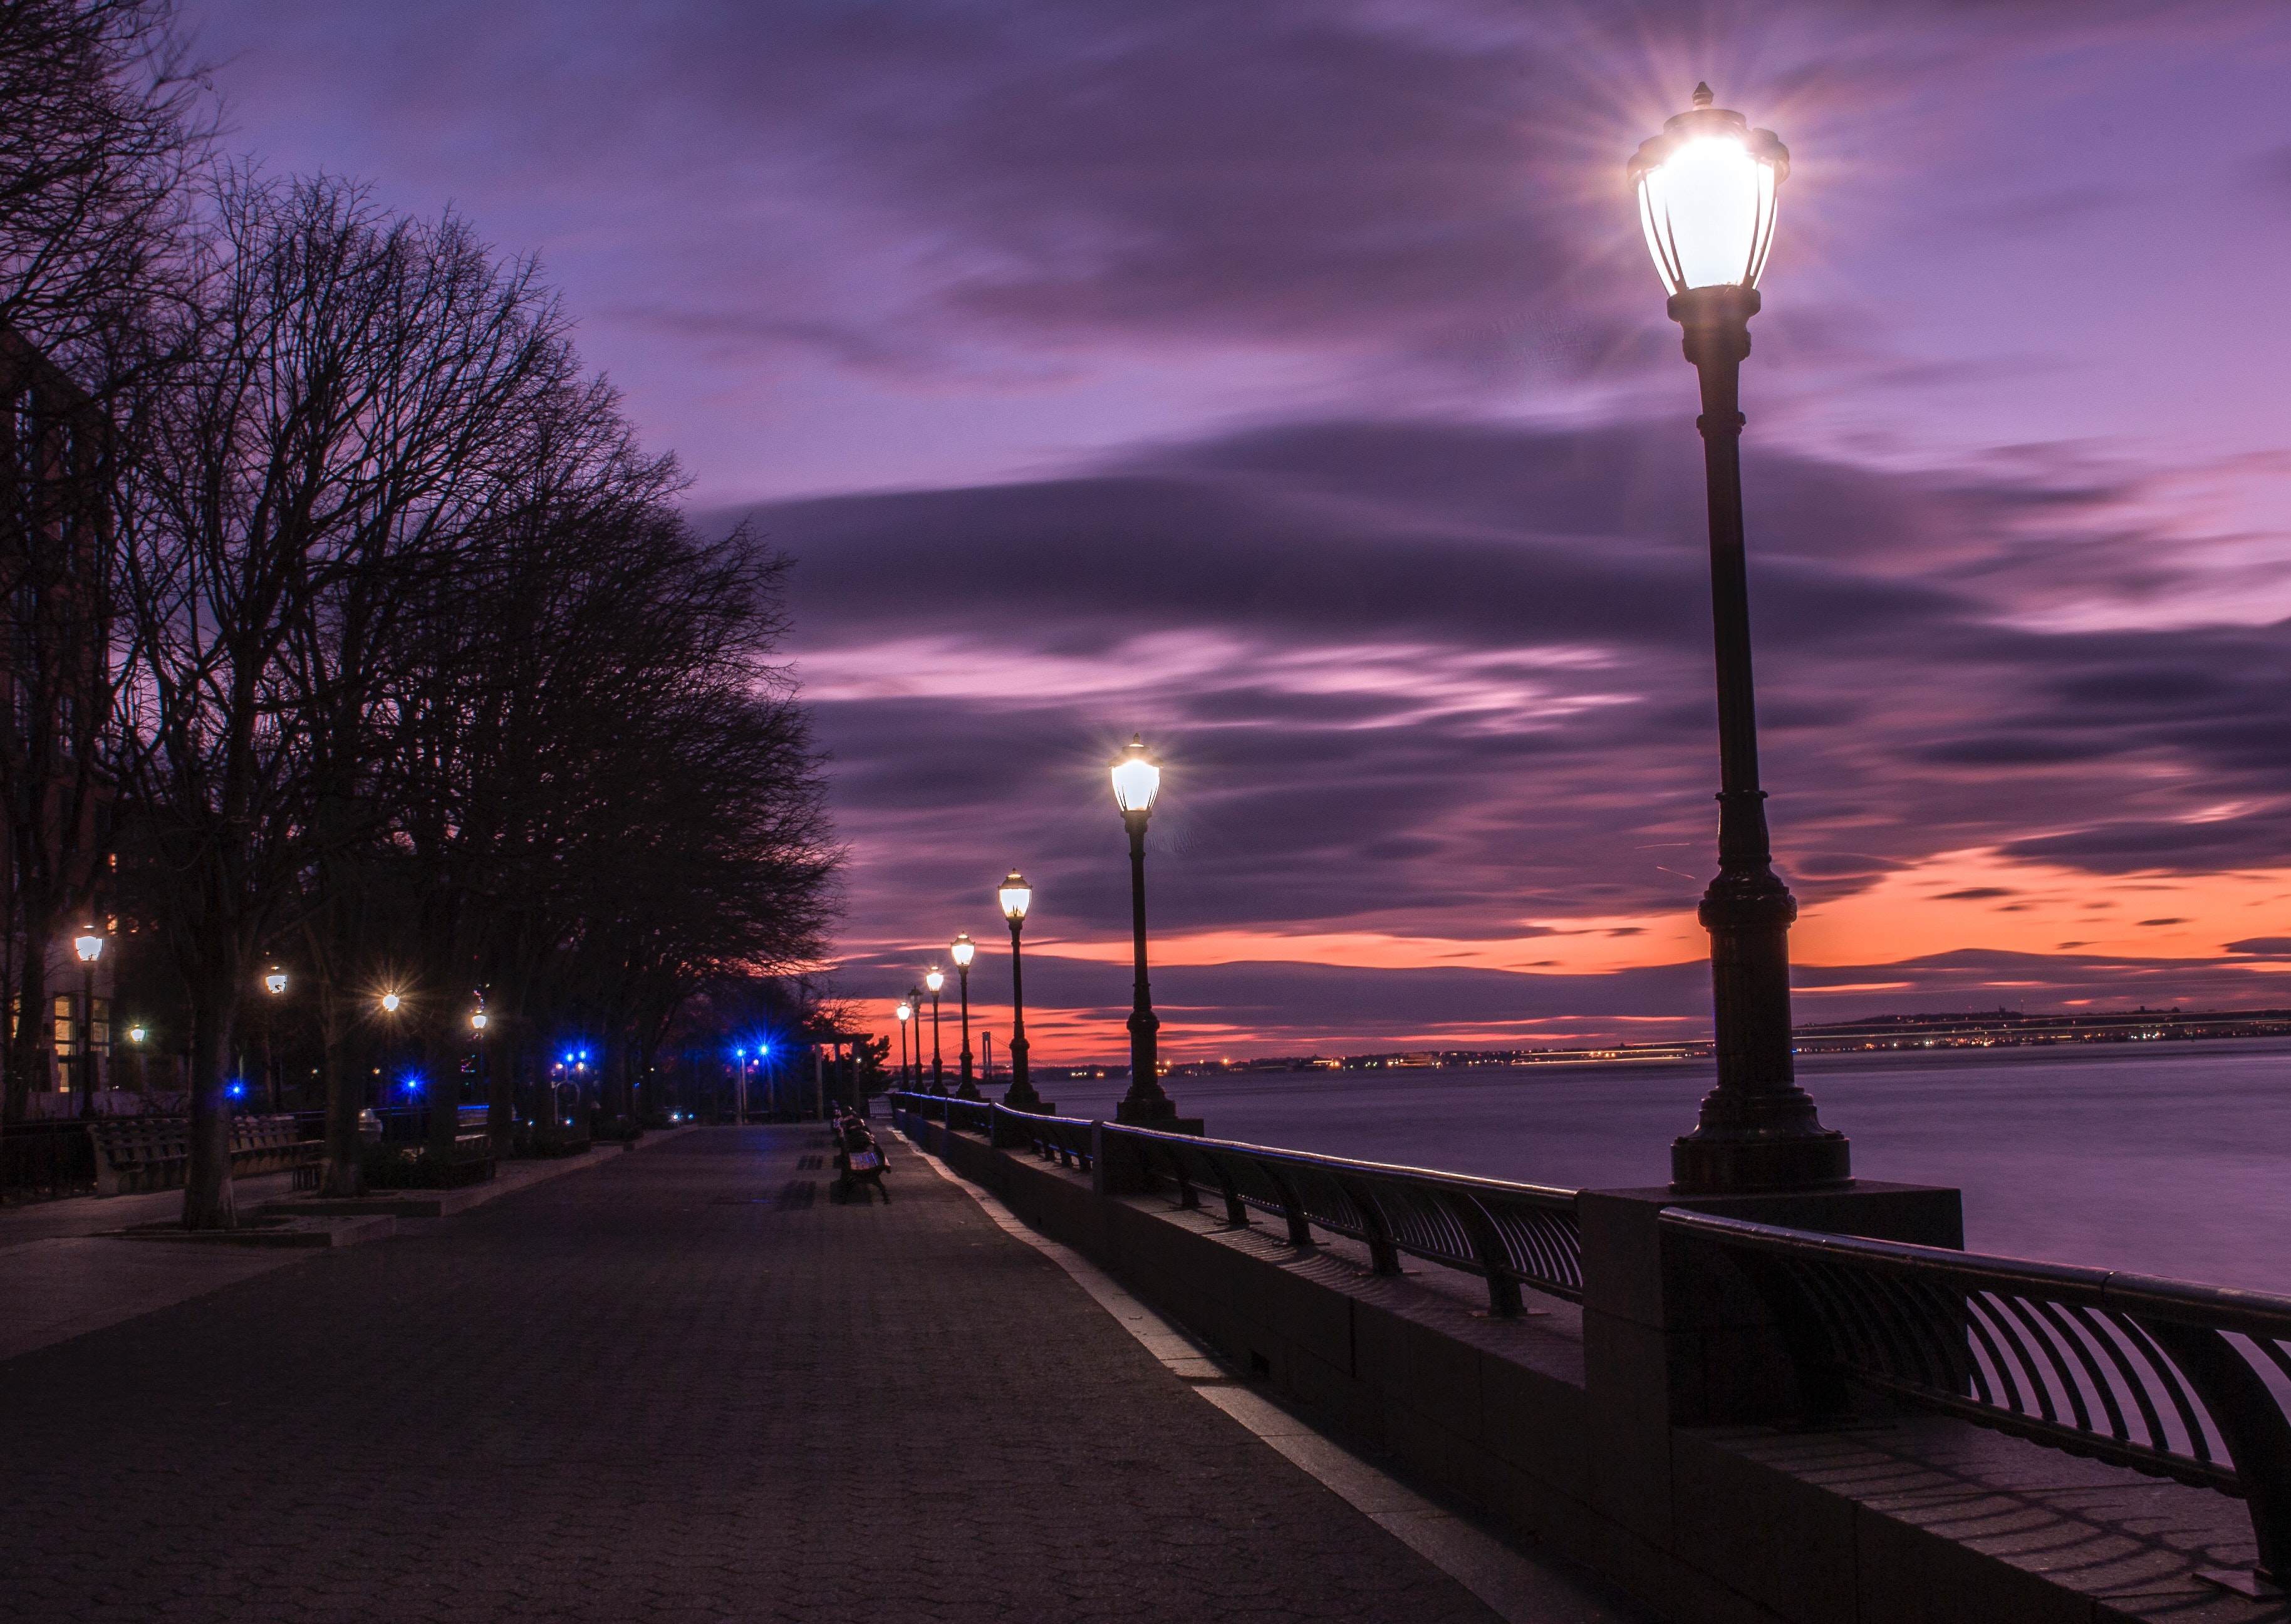 Photography of Turned on Street Lamps Beside Bay during Night Time, Architecture, Outdoors, Urban, Trees, HQ Photo